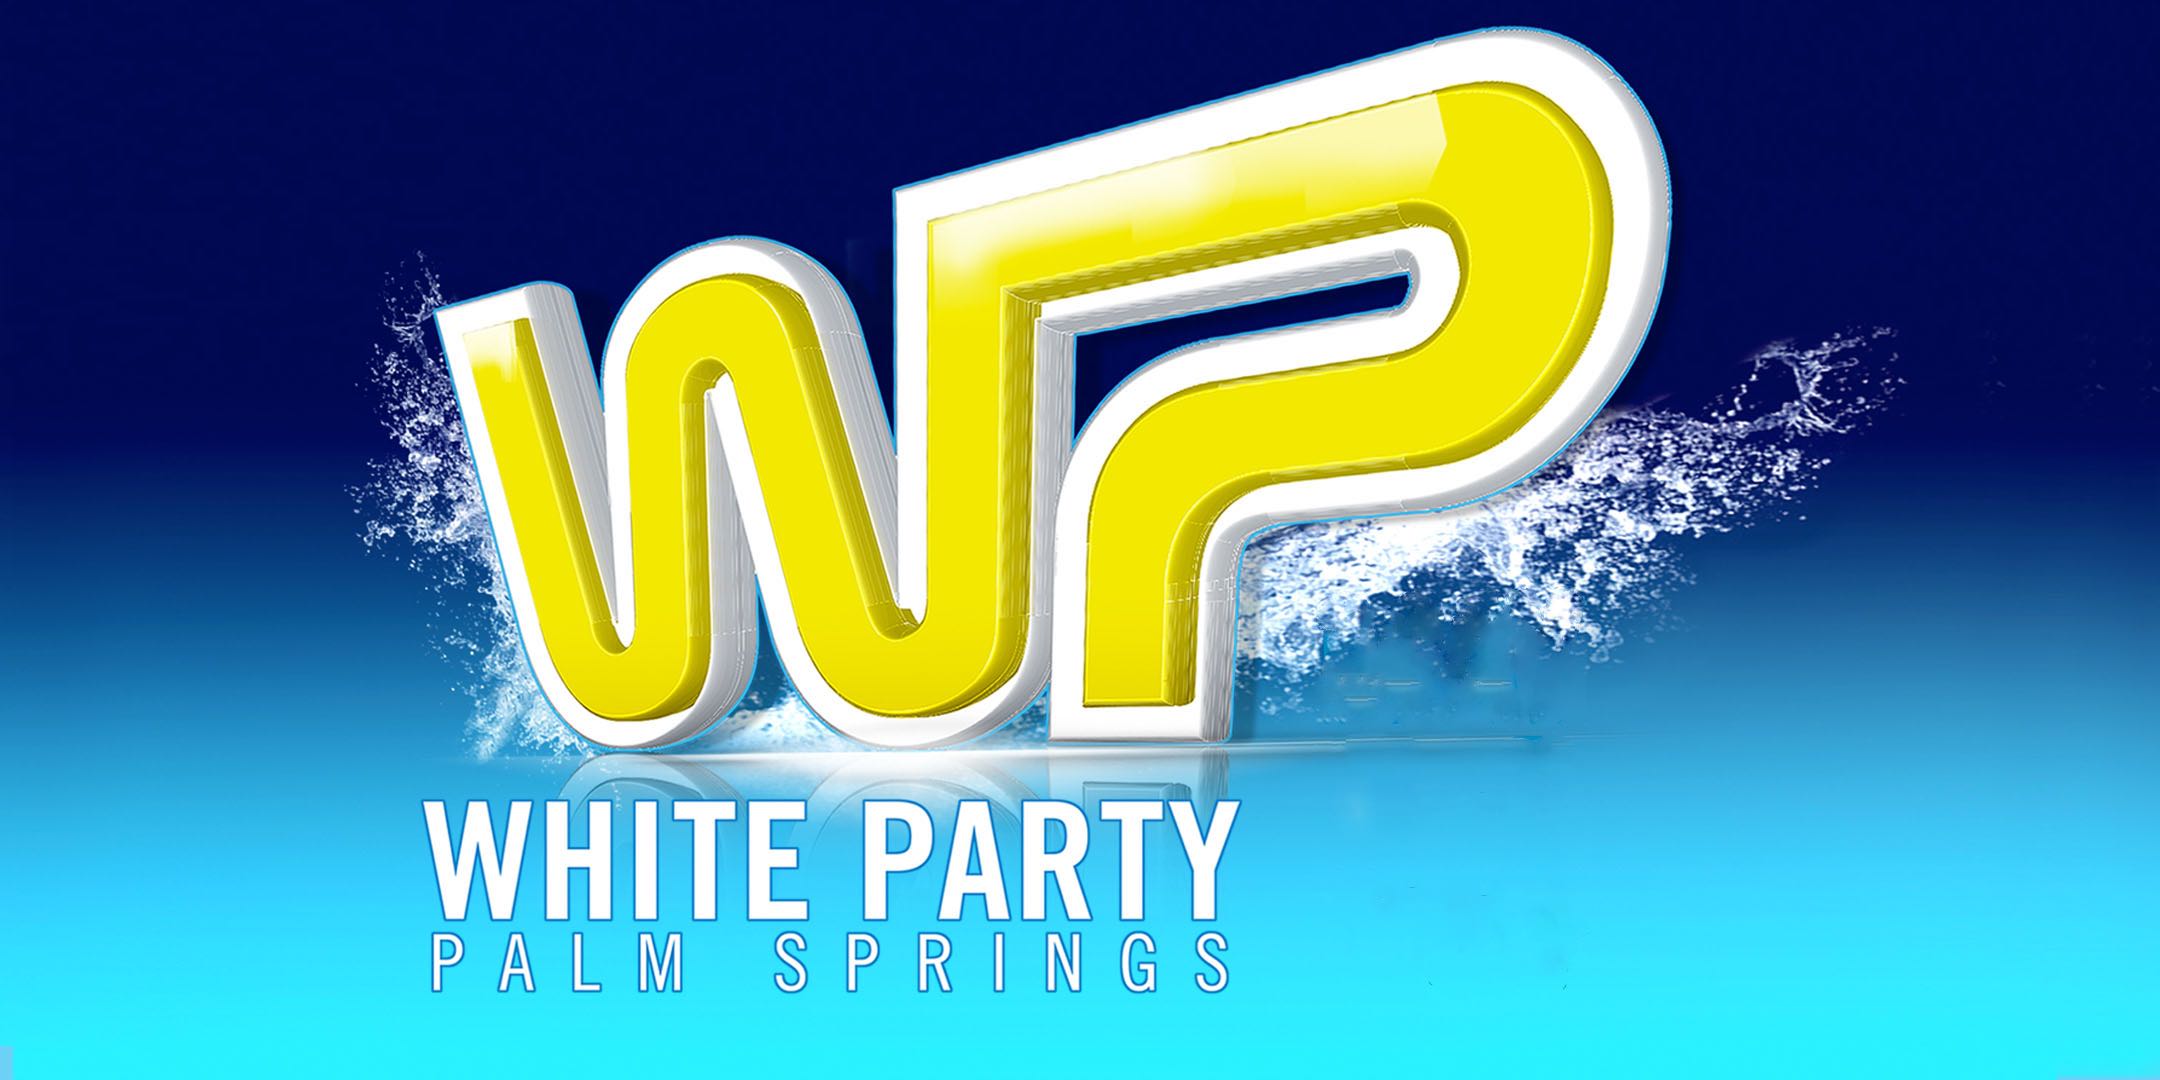 White Party Palm Springs